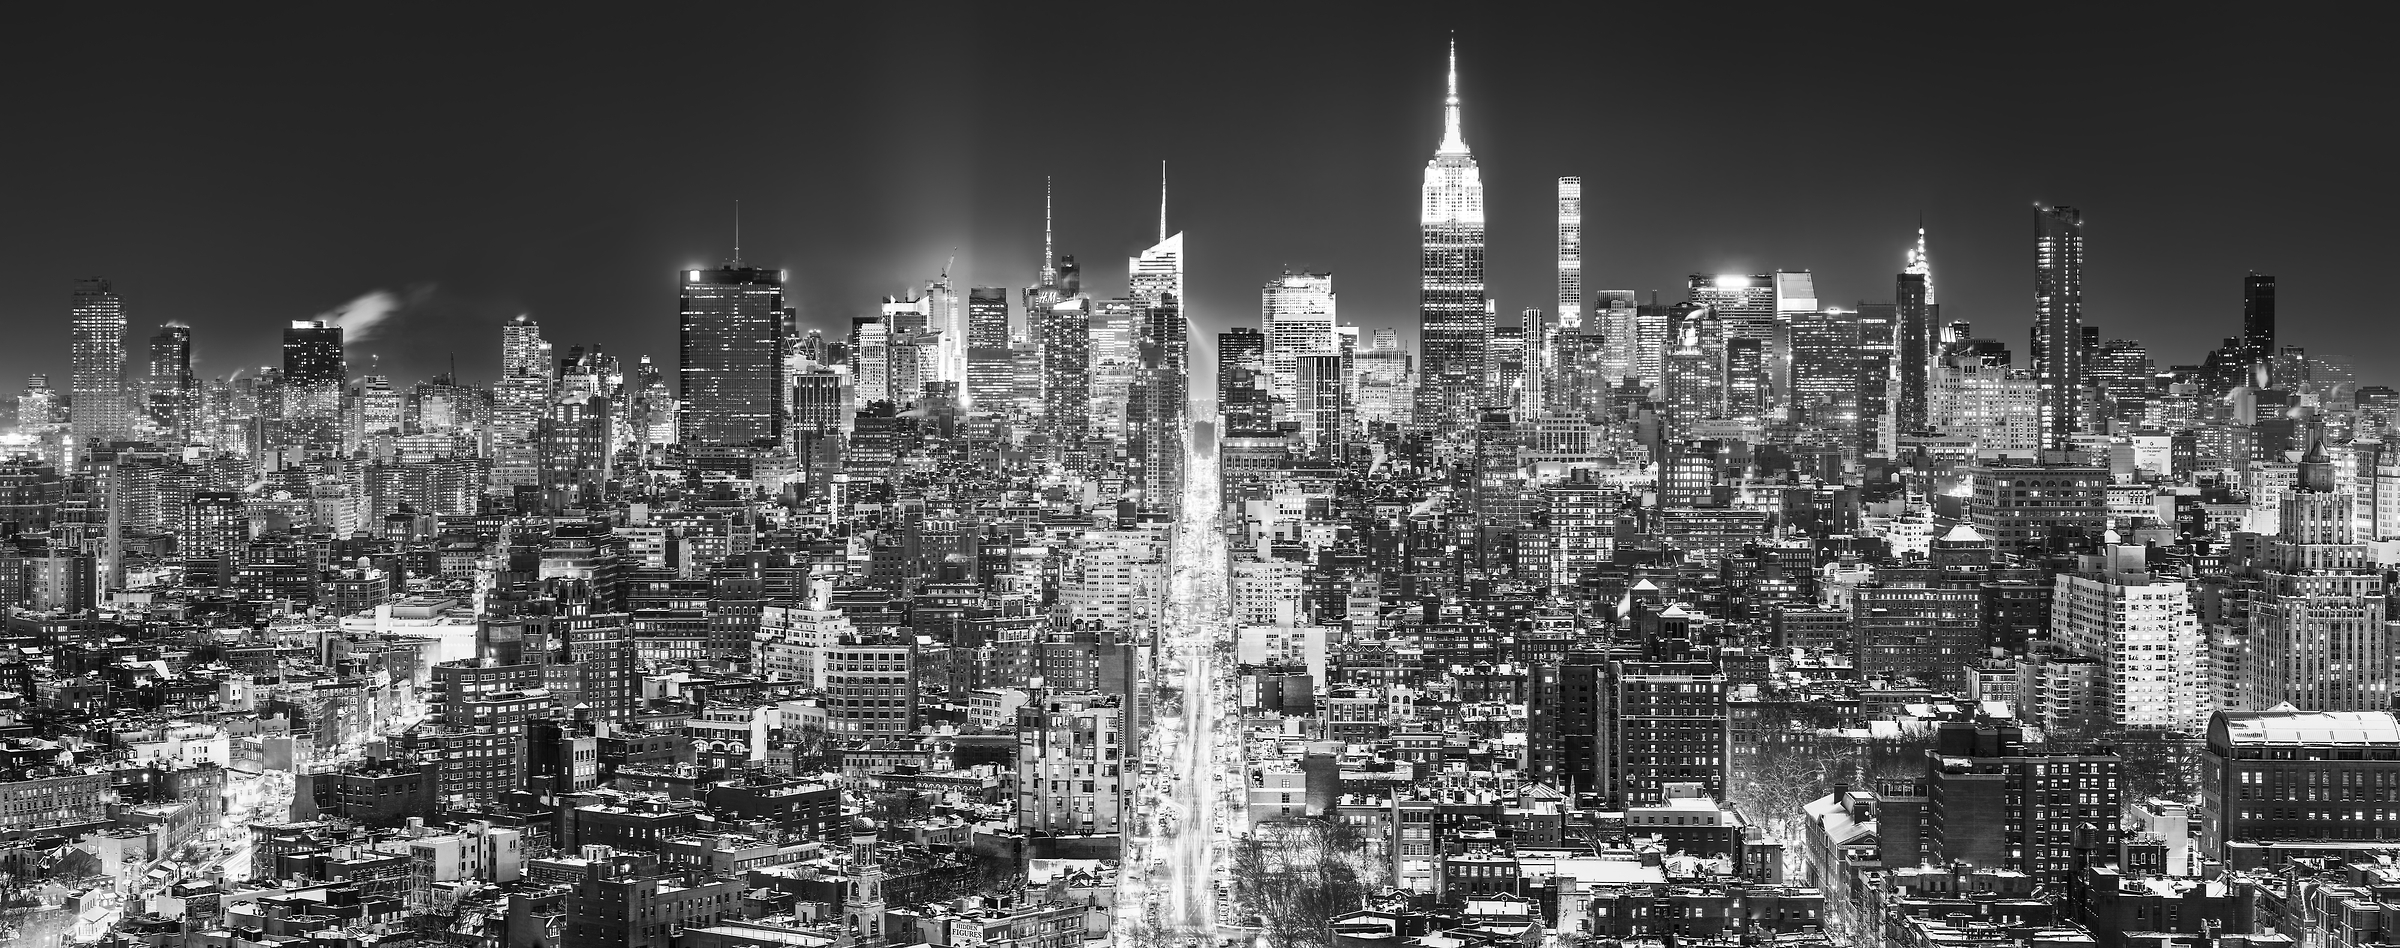 2,002 megapixels! A very high resolution, large-format VAST photo print of the Manhattan NYC skyline in winter snow at night; black and white cityscape fine art photo created by Dan Piech in New York City